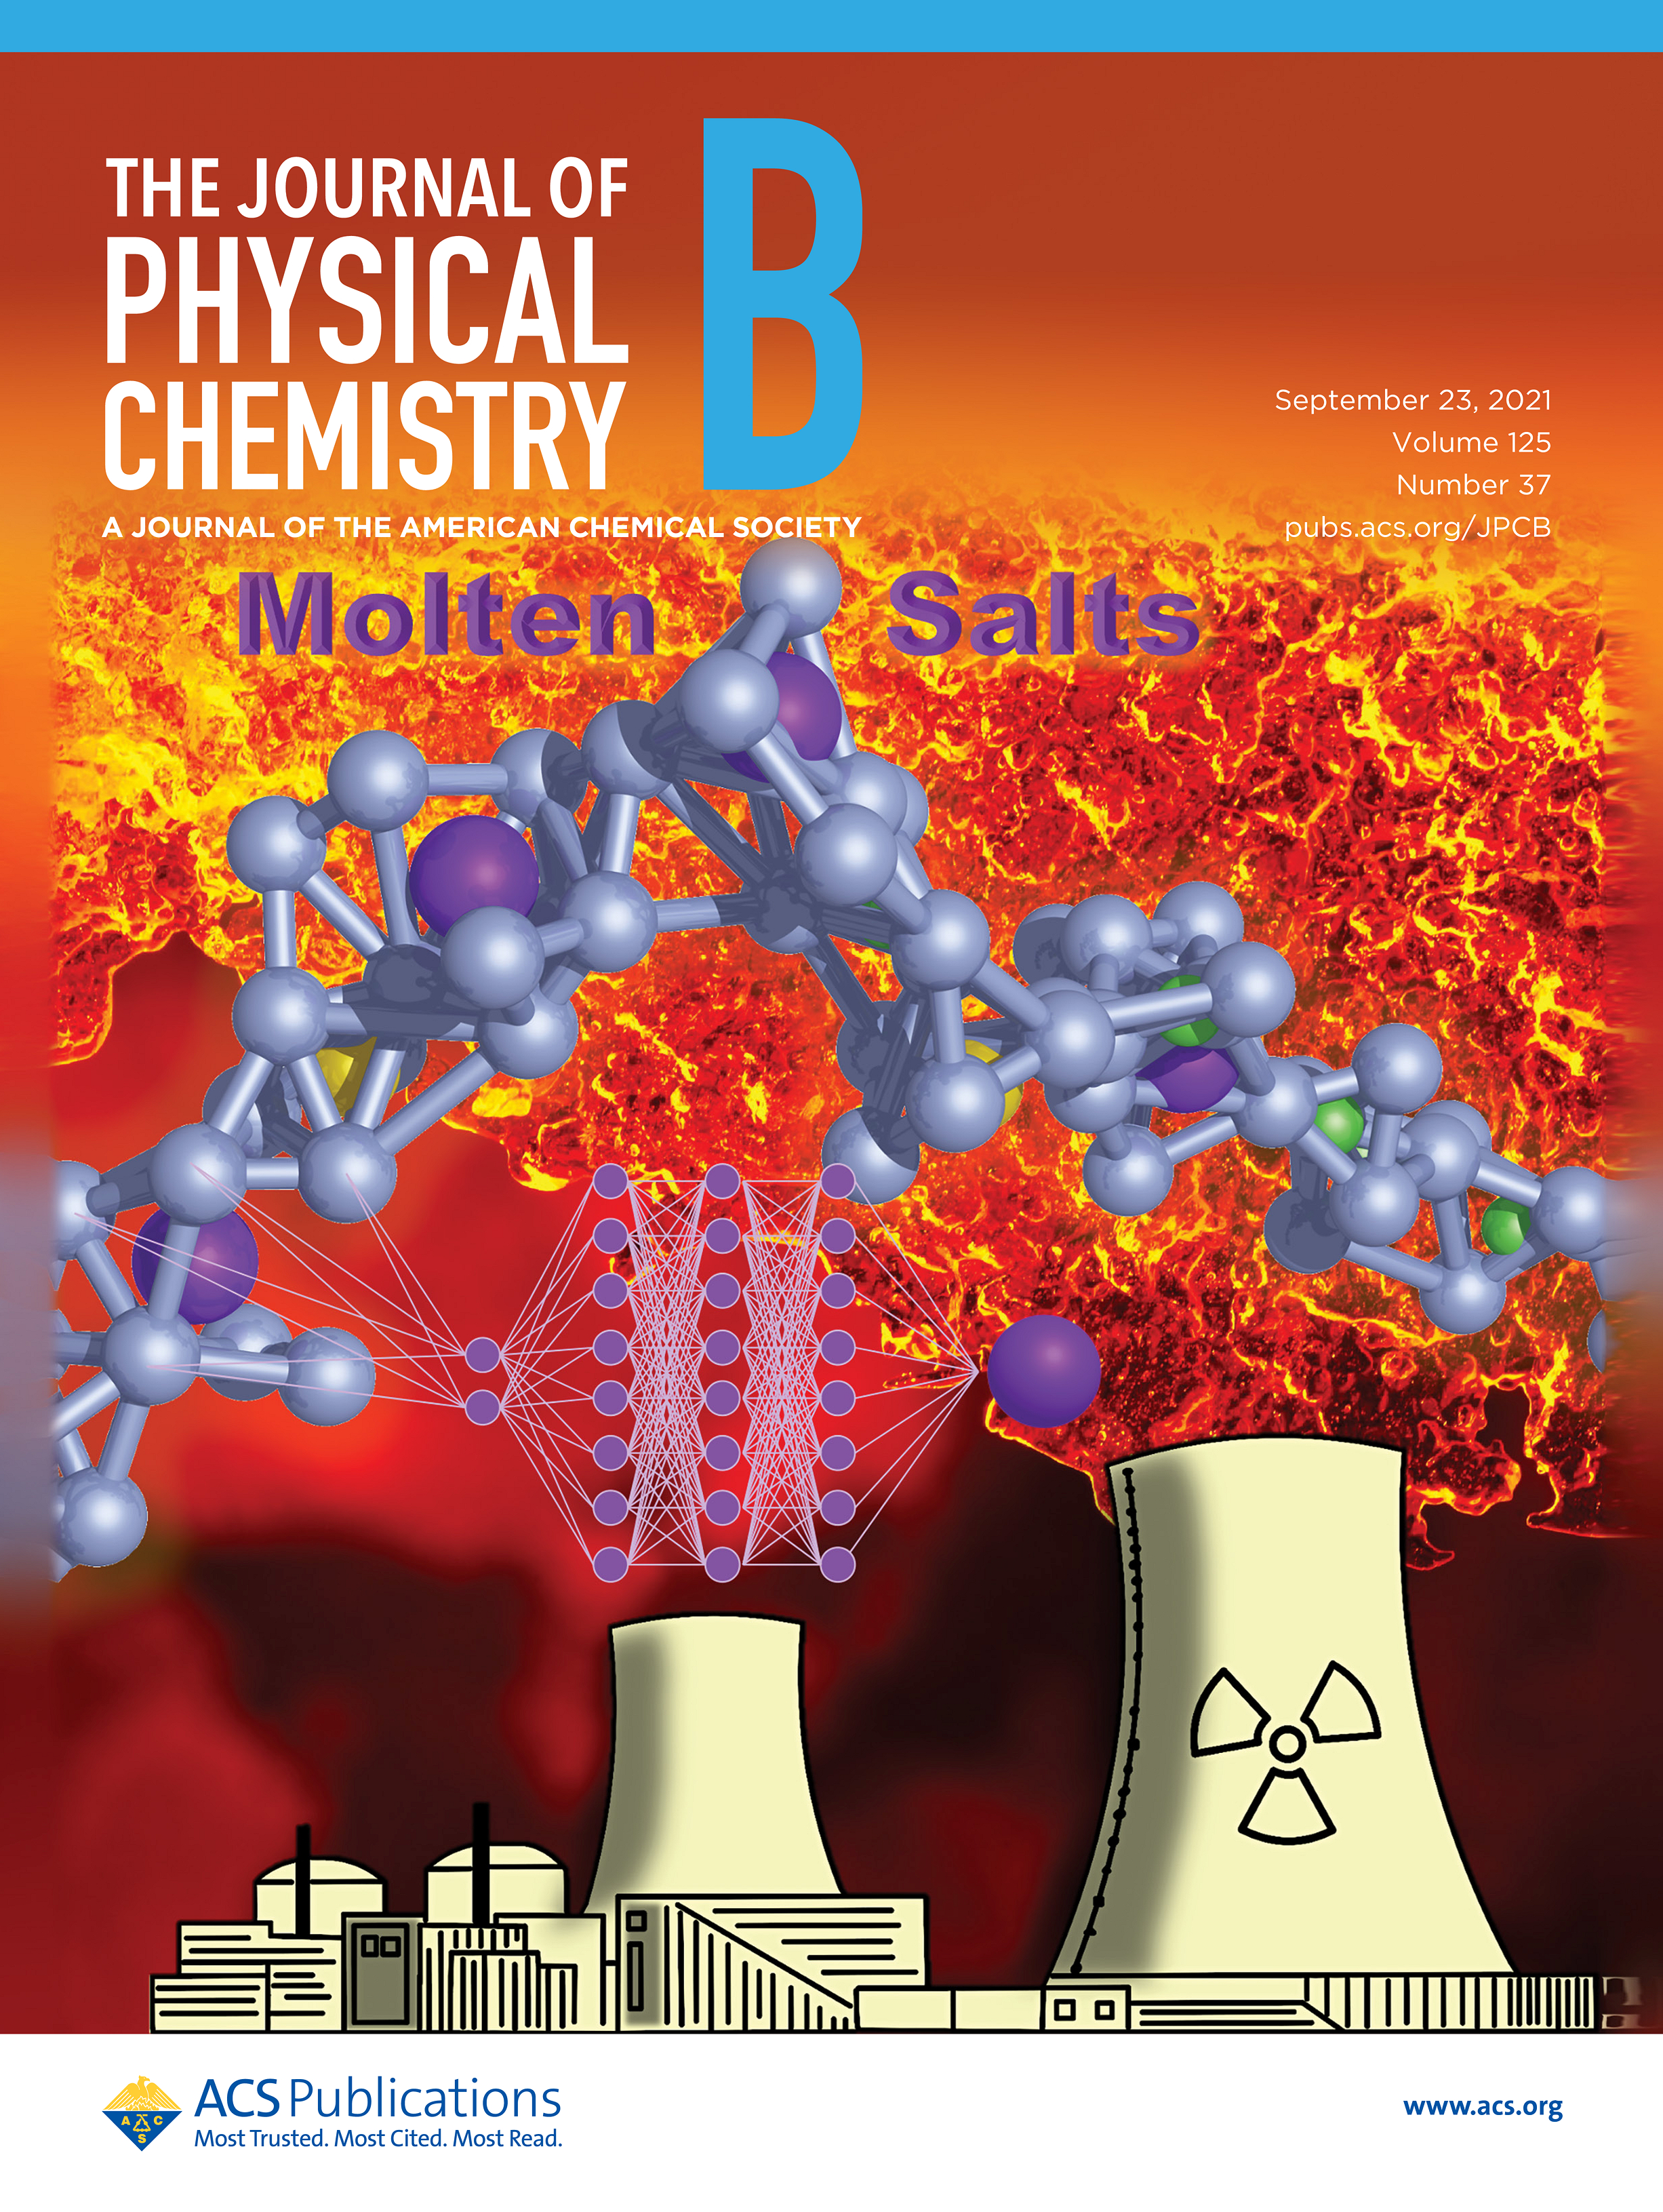 Journal of Physical Chemistry B cover art depicting work from Yang Zhang's lab group